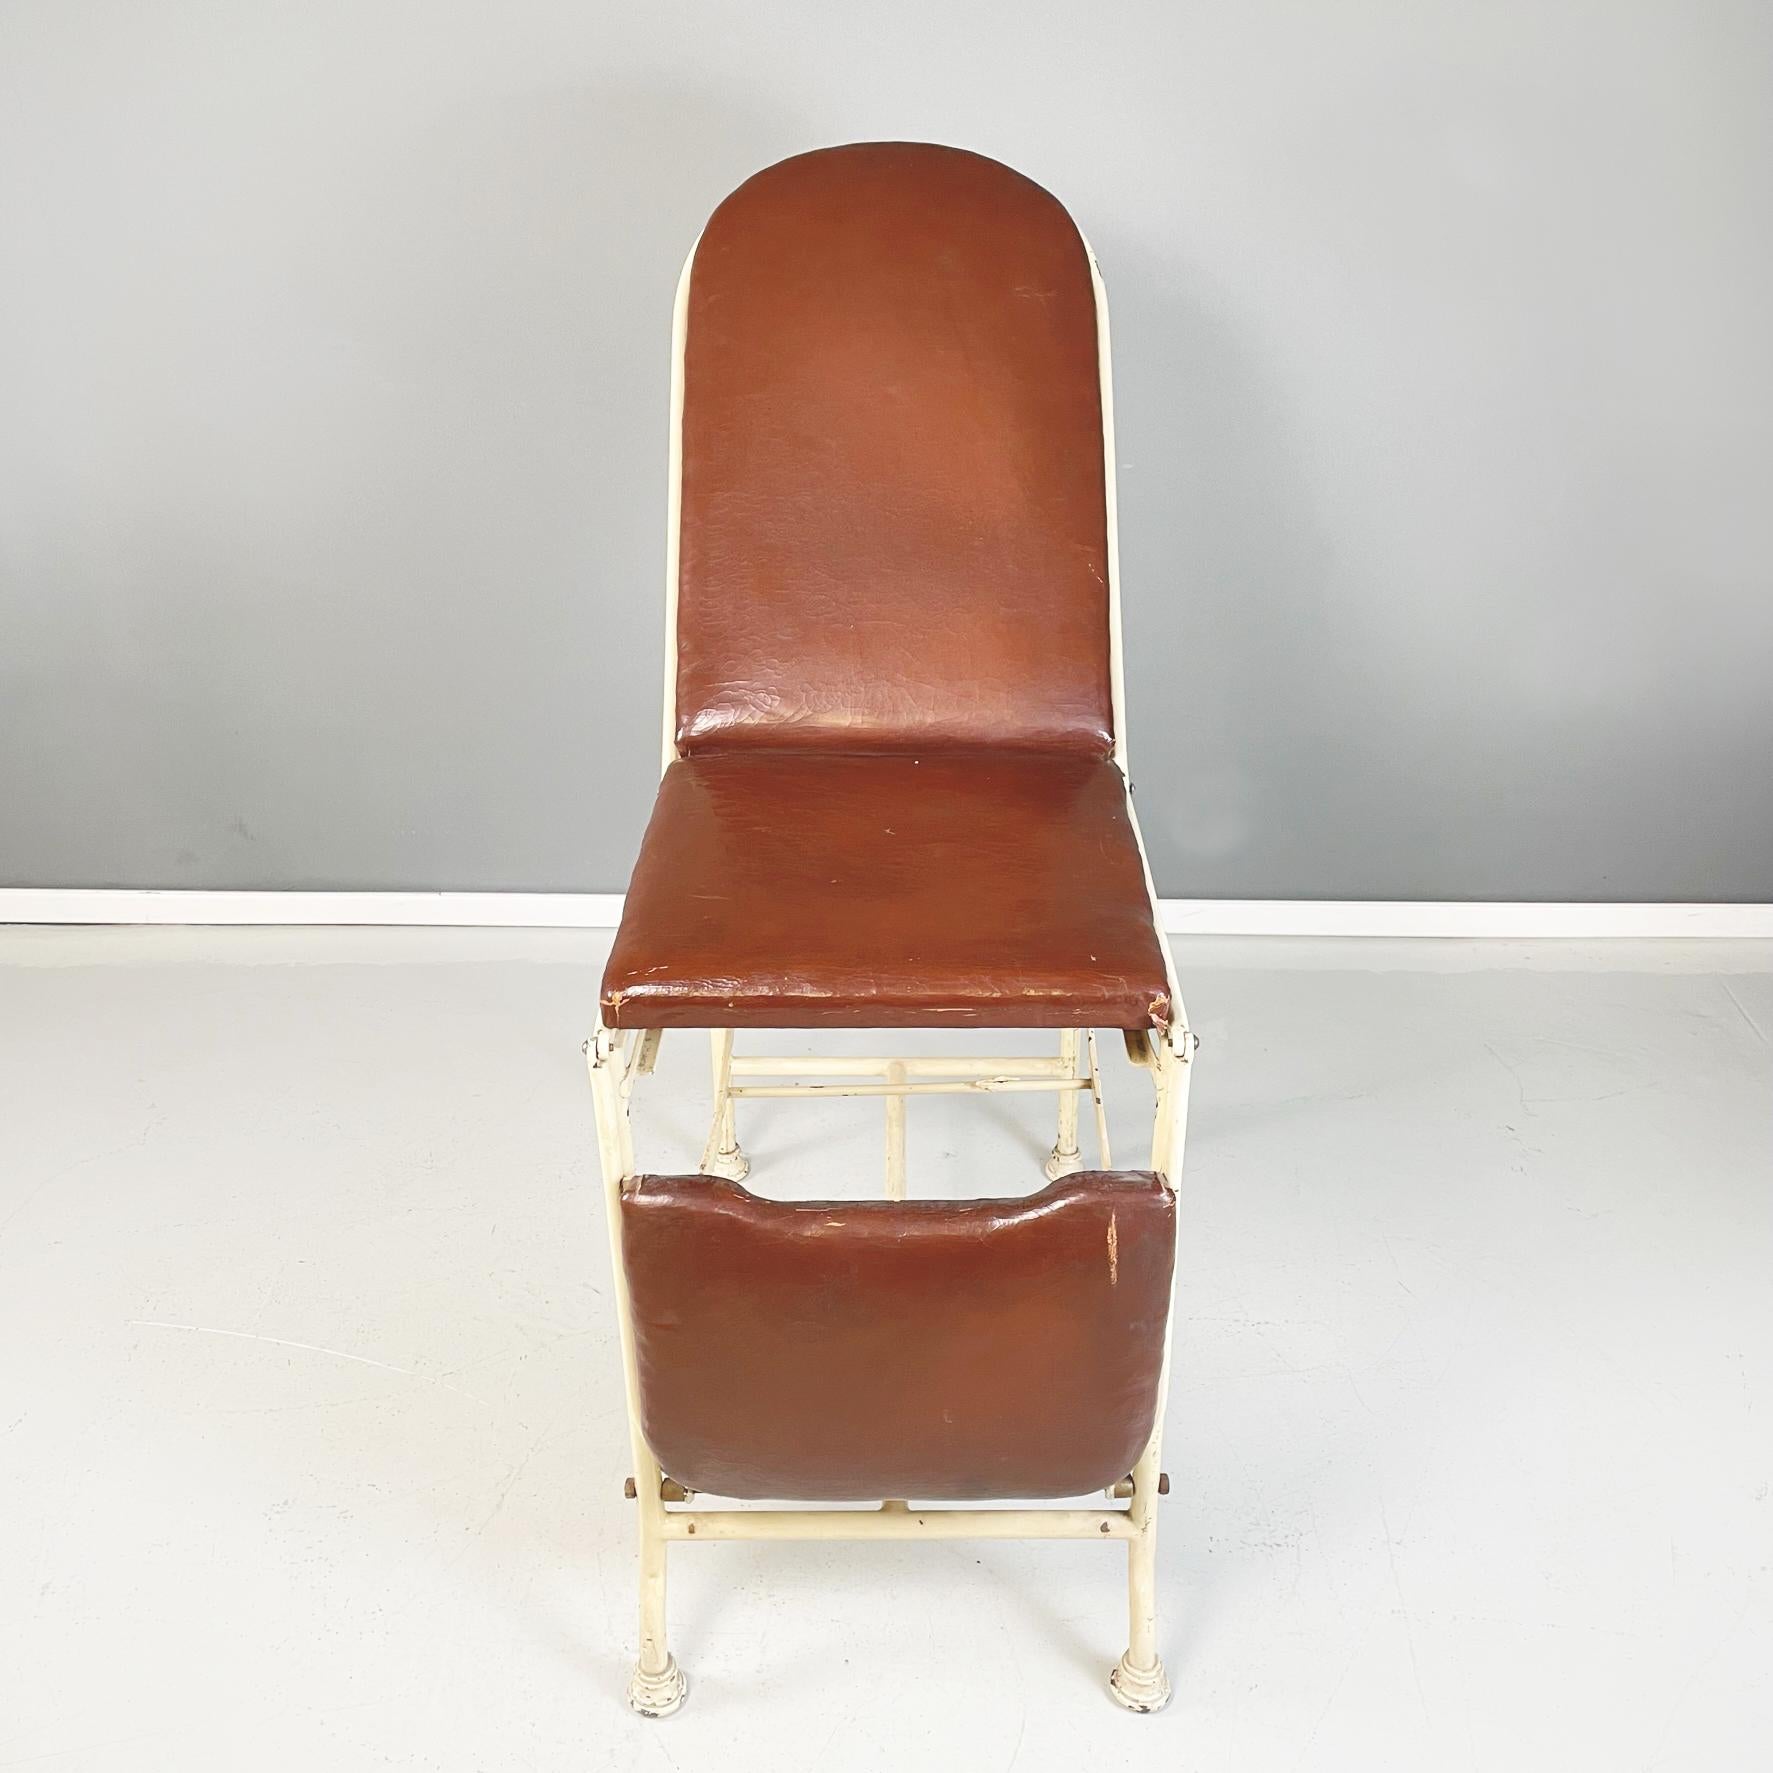 Italian Mid-Century Medical Laboratory Bed Brown Leather and White Metal, 1940s For Sale 1